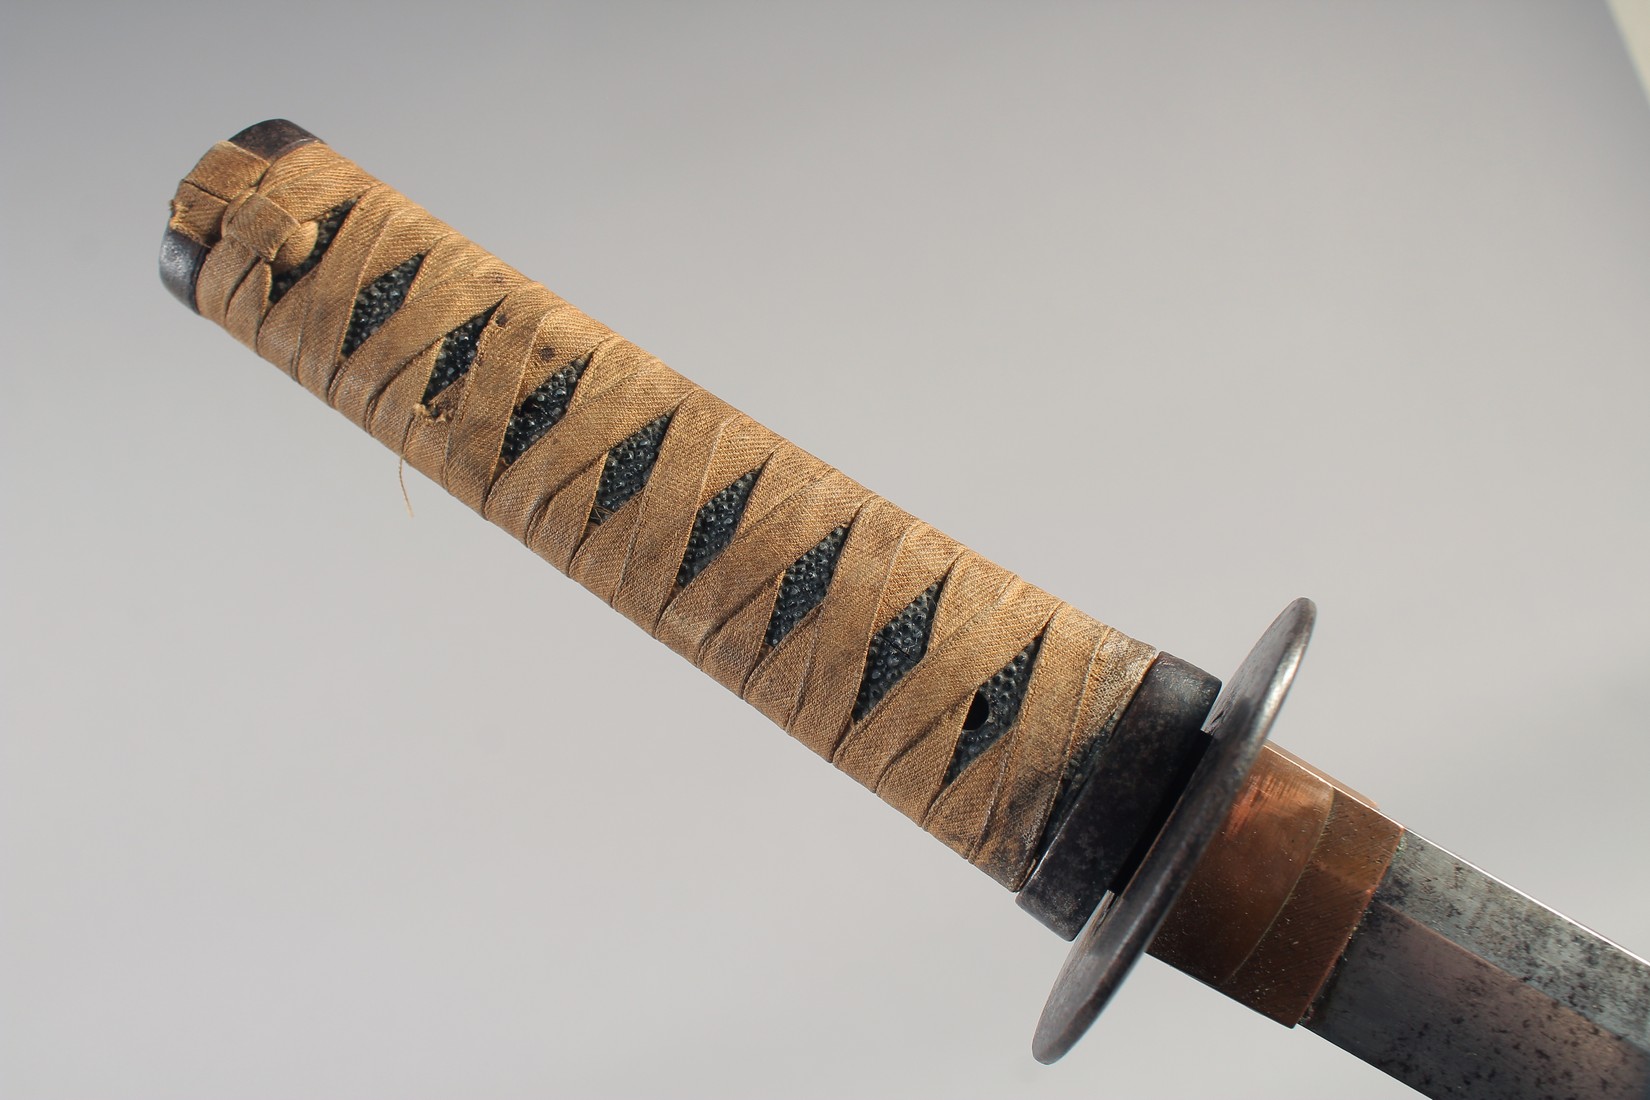 A LATE 19TH - EARLY 20TH CENTURY APANESE WAKIZASHI, with cord bound grip, gold inlaid steel tsuba in - Image 3 of 5